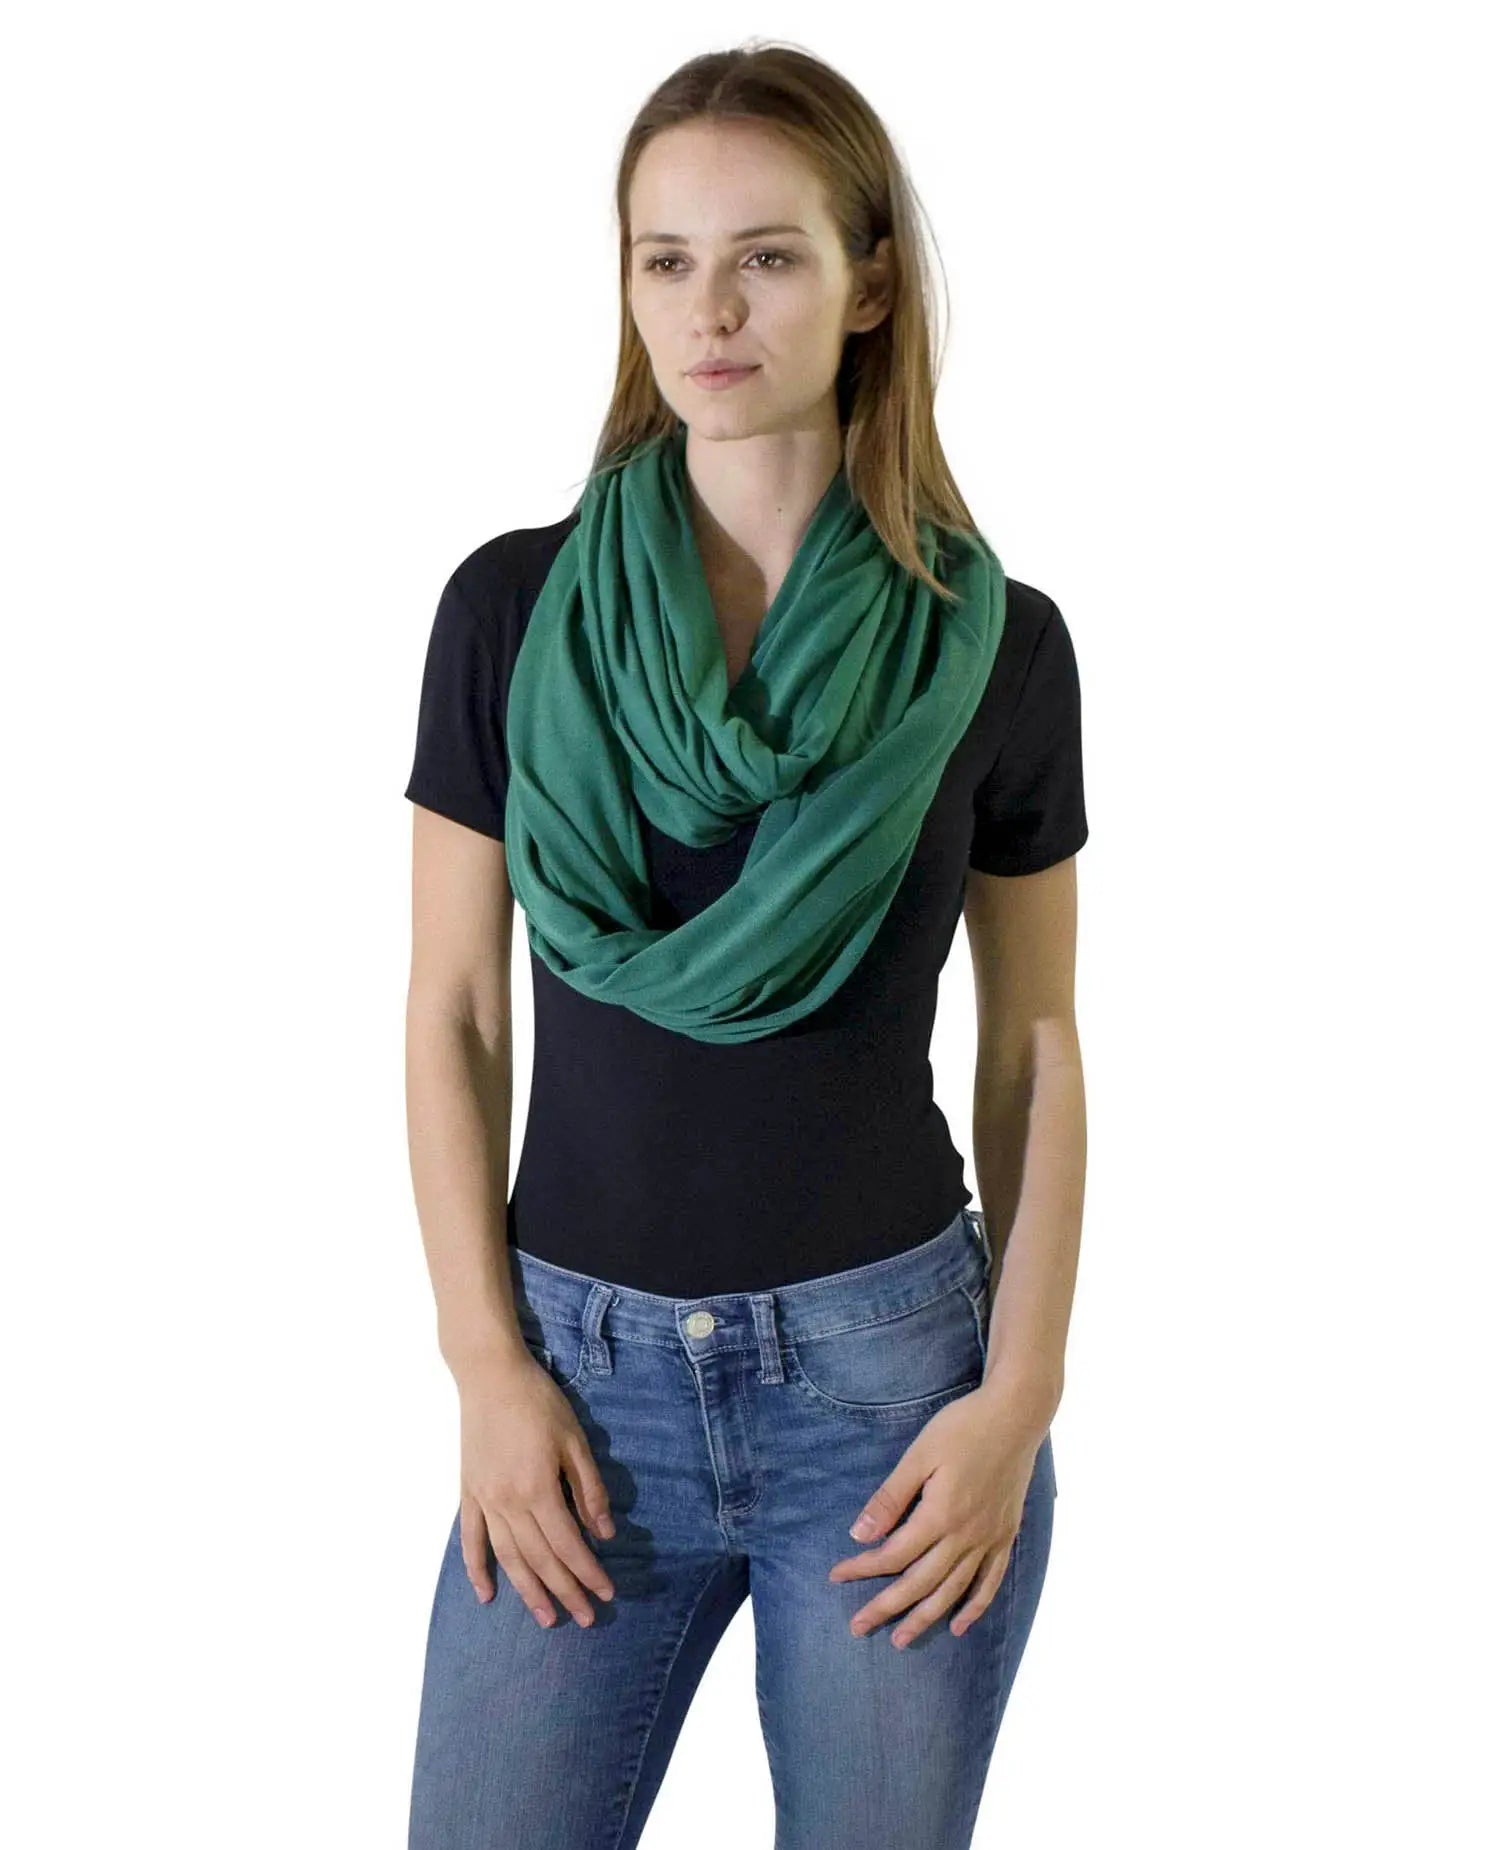 Cotton blend jersey winter snood with woman wearing green scarf